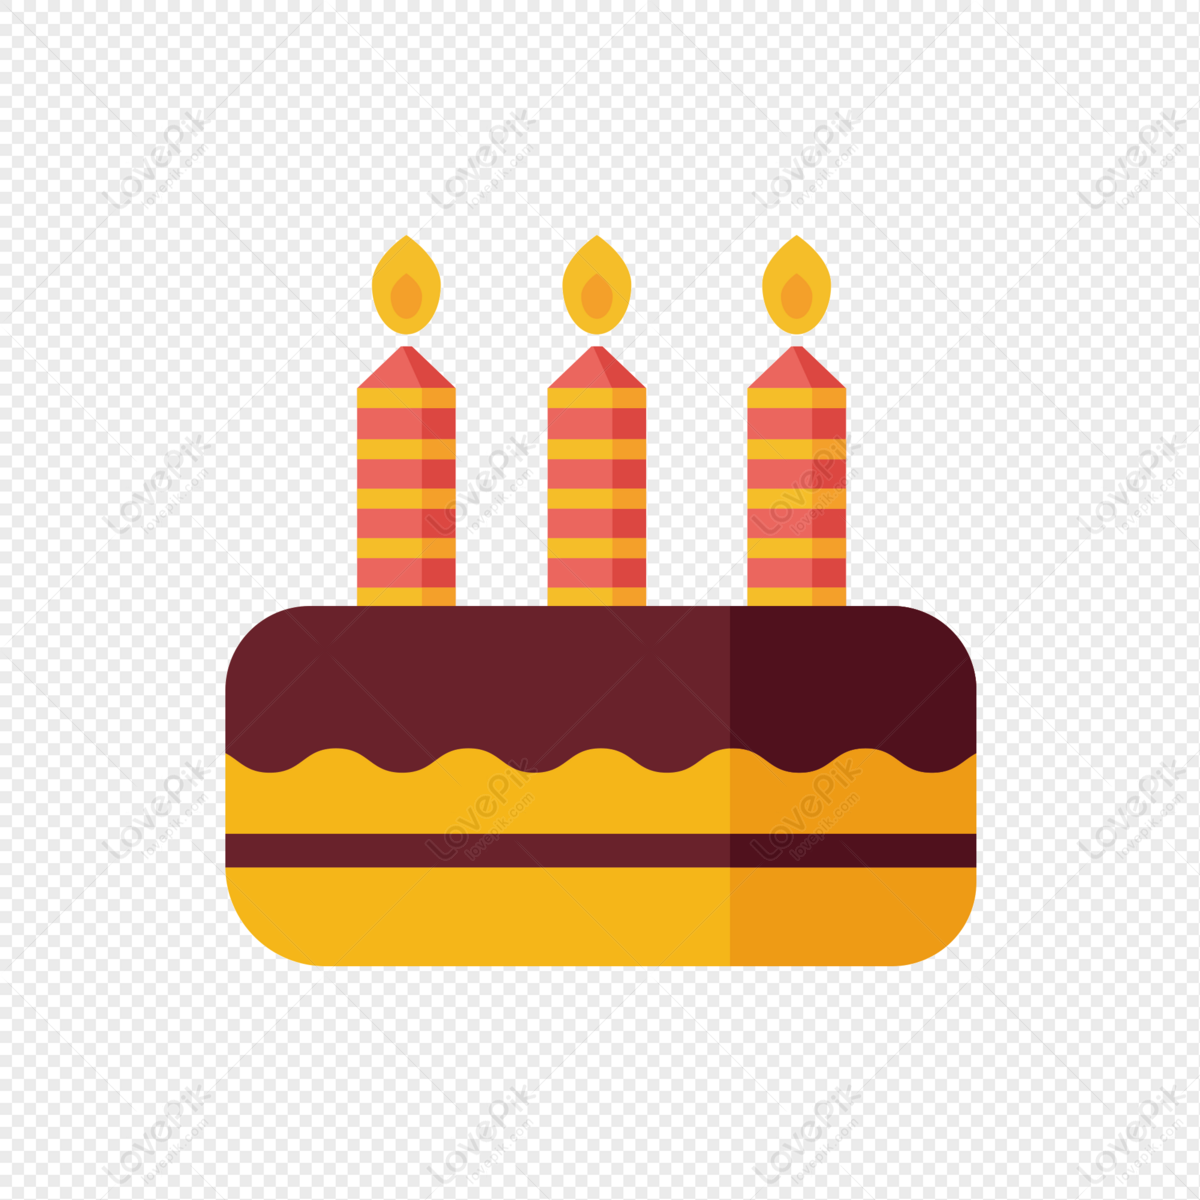 Sandwich Birthday Cake, Birthday Yellow, Birthday Icon, Cake Icon PNG Hd  Transparent Image And Clipart Image For Free Download - Lovepik | 401019184